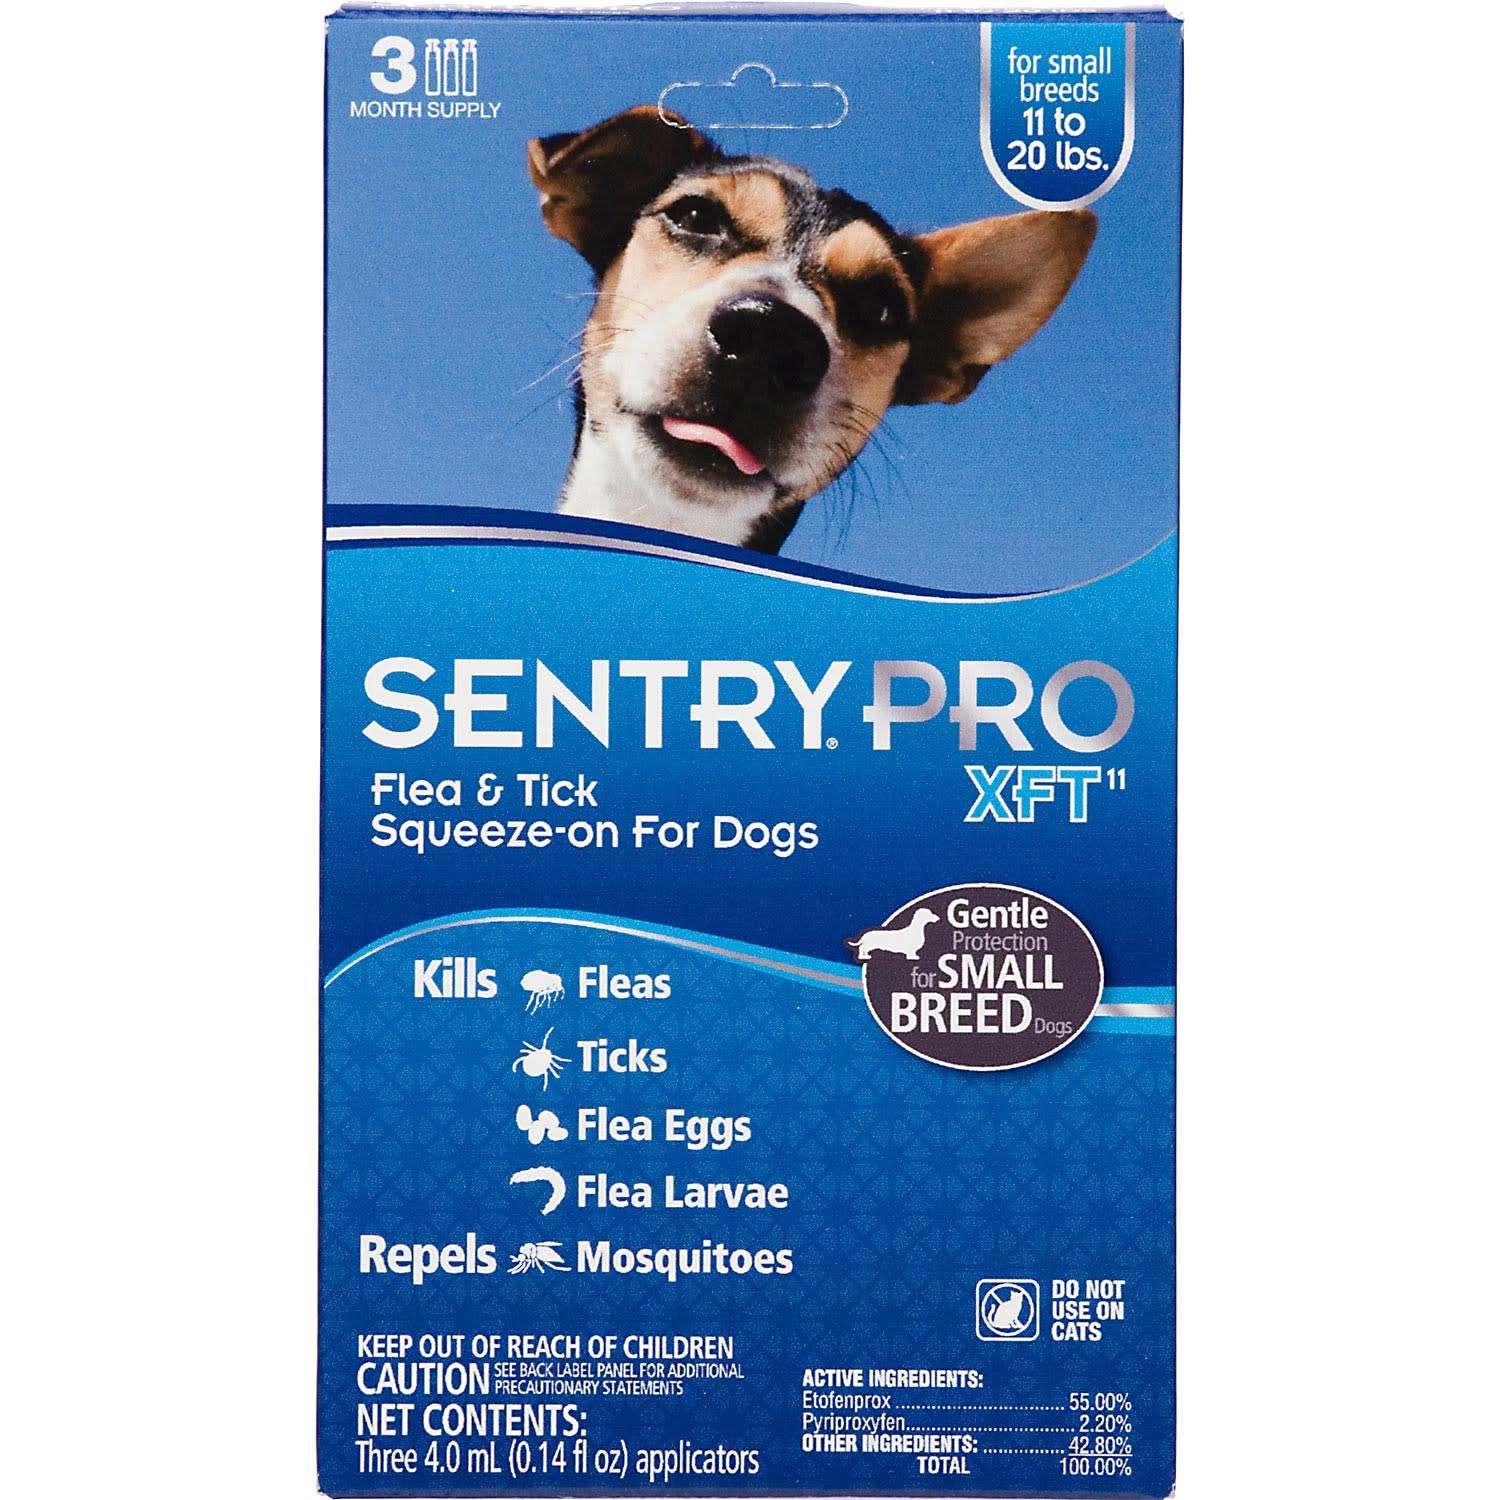 Sentry Pro XFT Squeeze-On Dogs 11 to 20 lbs. Flea & Tick Treatment, 3 Month Supply, 4 ML